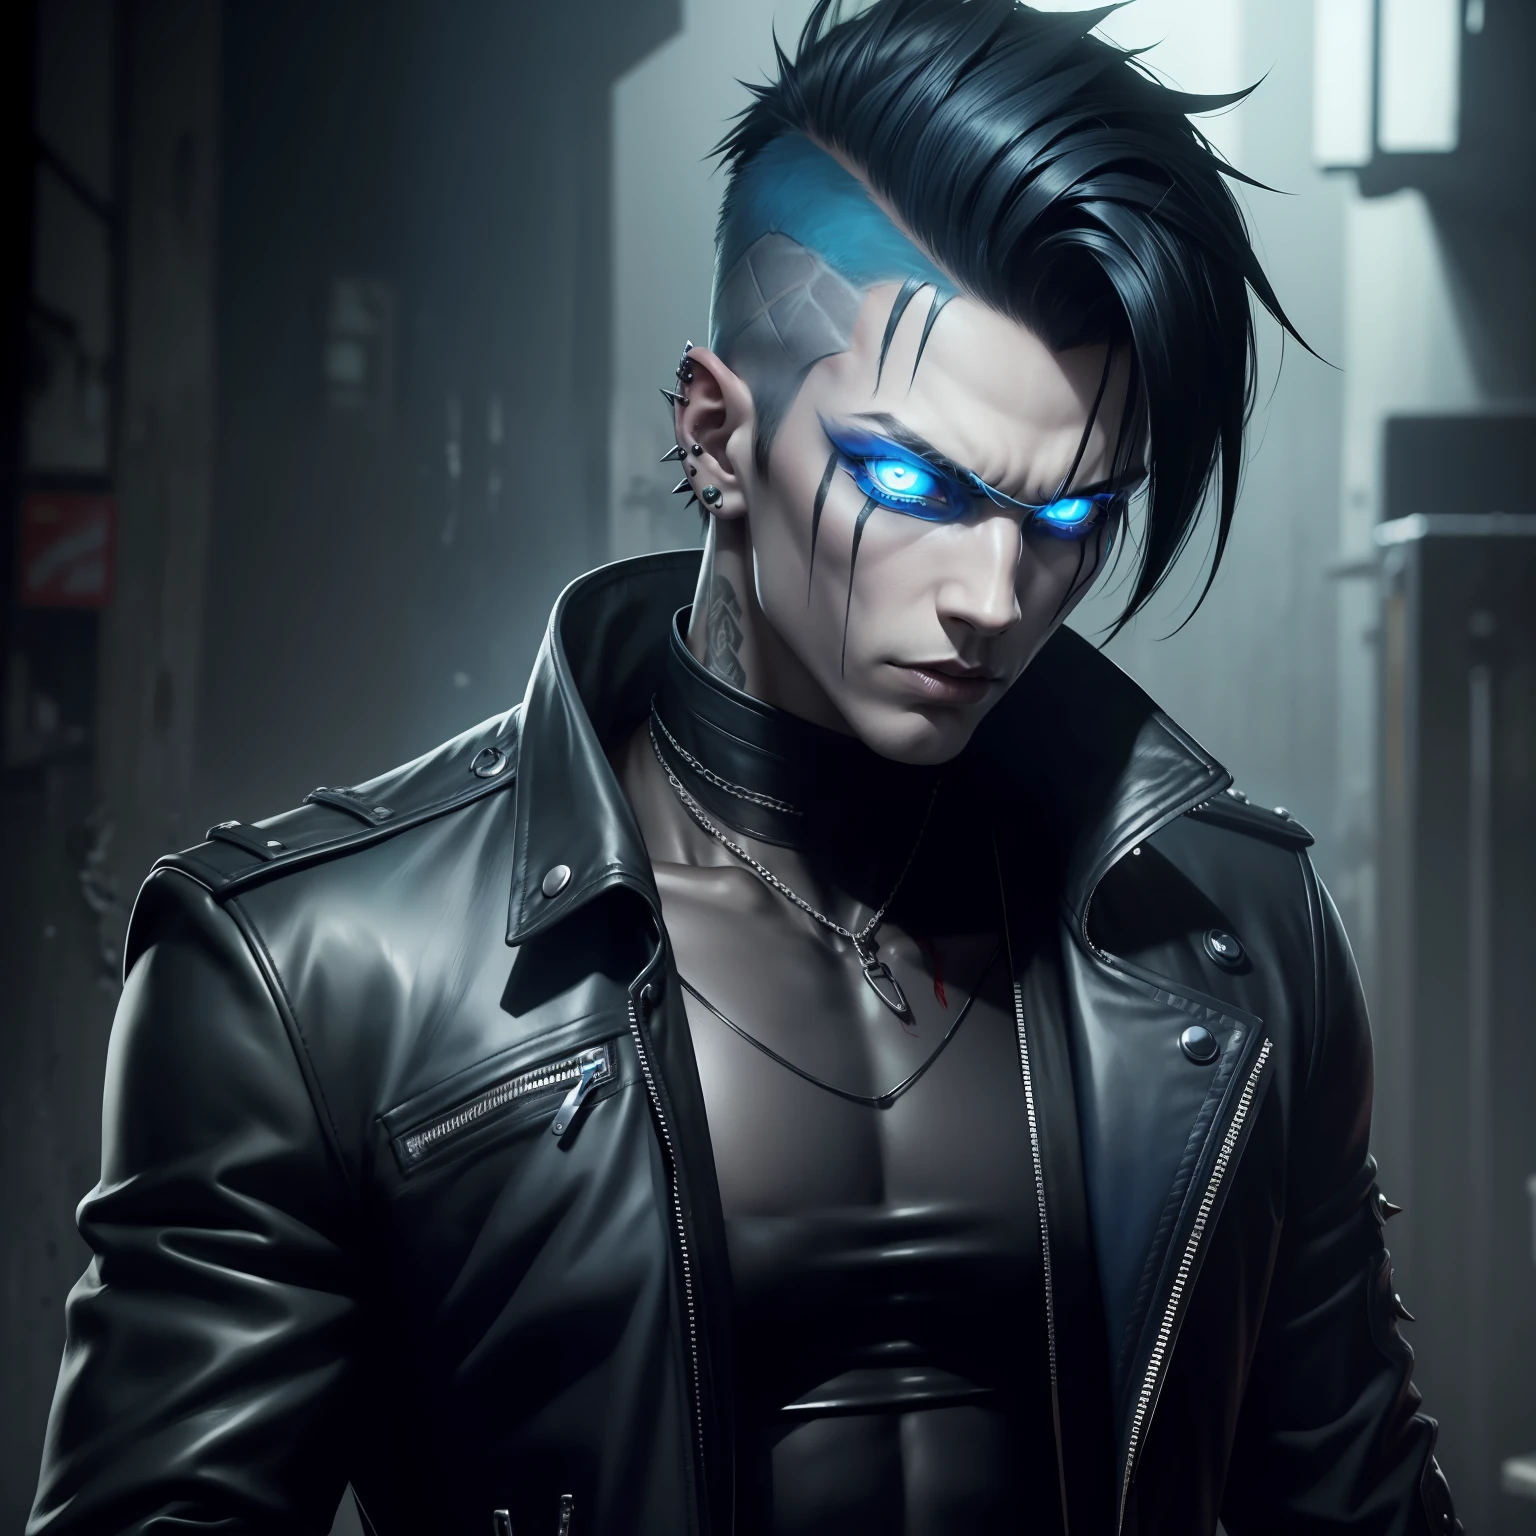 Male. Attractive Zombie. Glowing blue eyes. Slender, hut muscled. Black hair. Punk hairstyle. Lots of piercings. Dressed in leather.